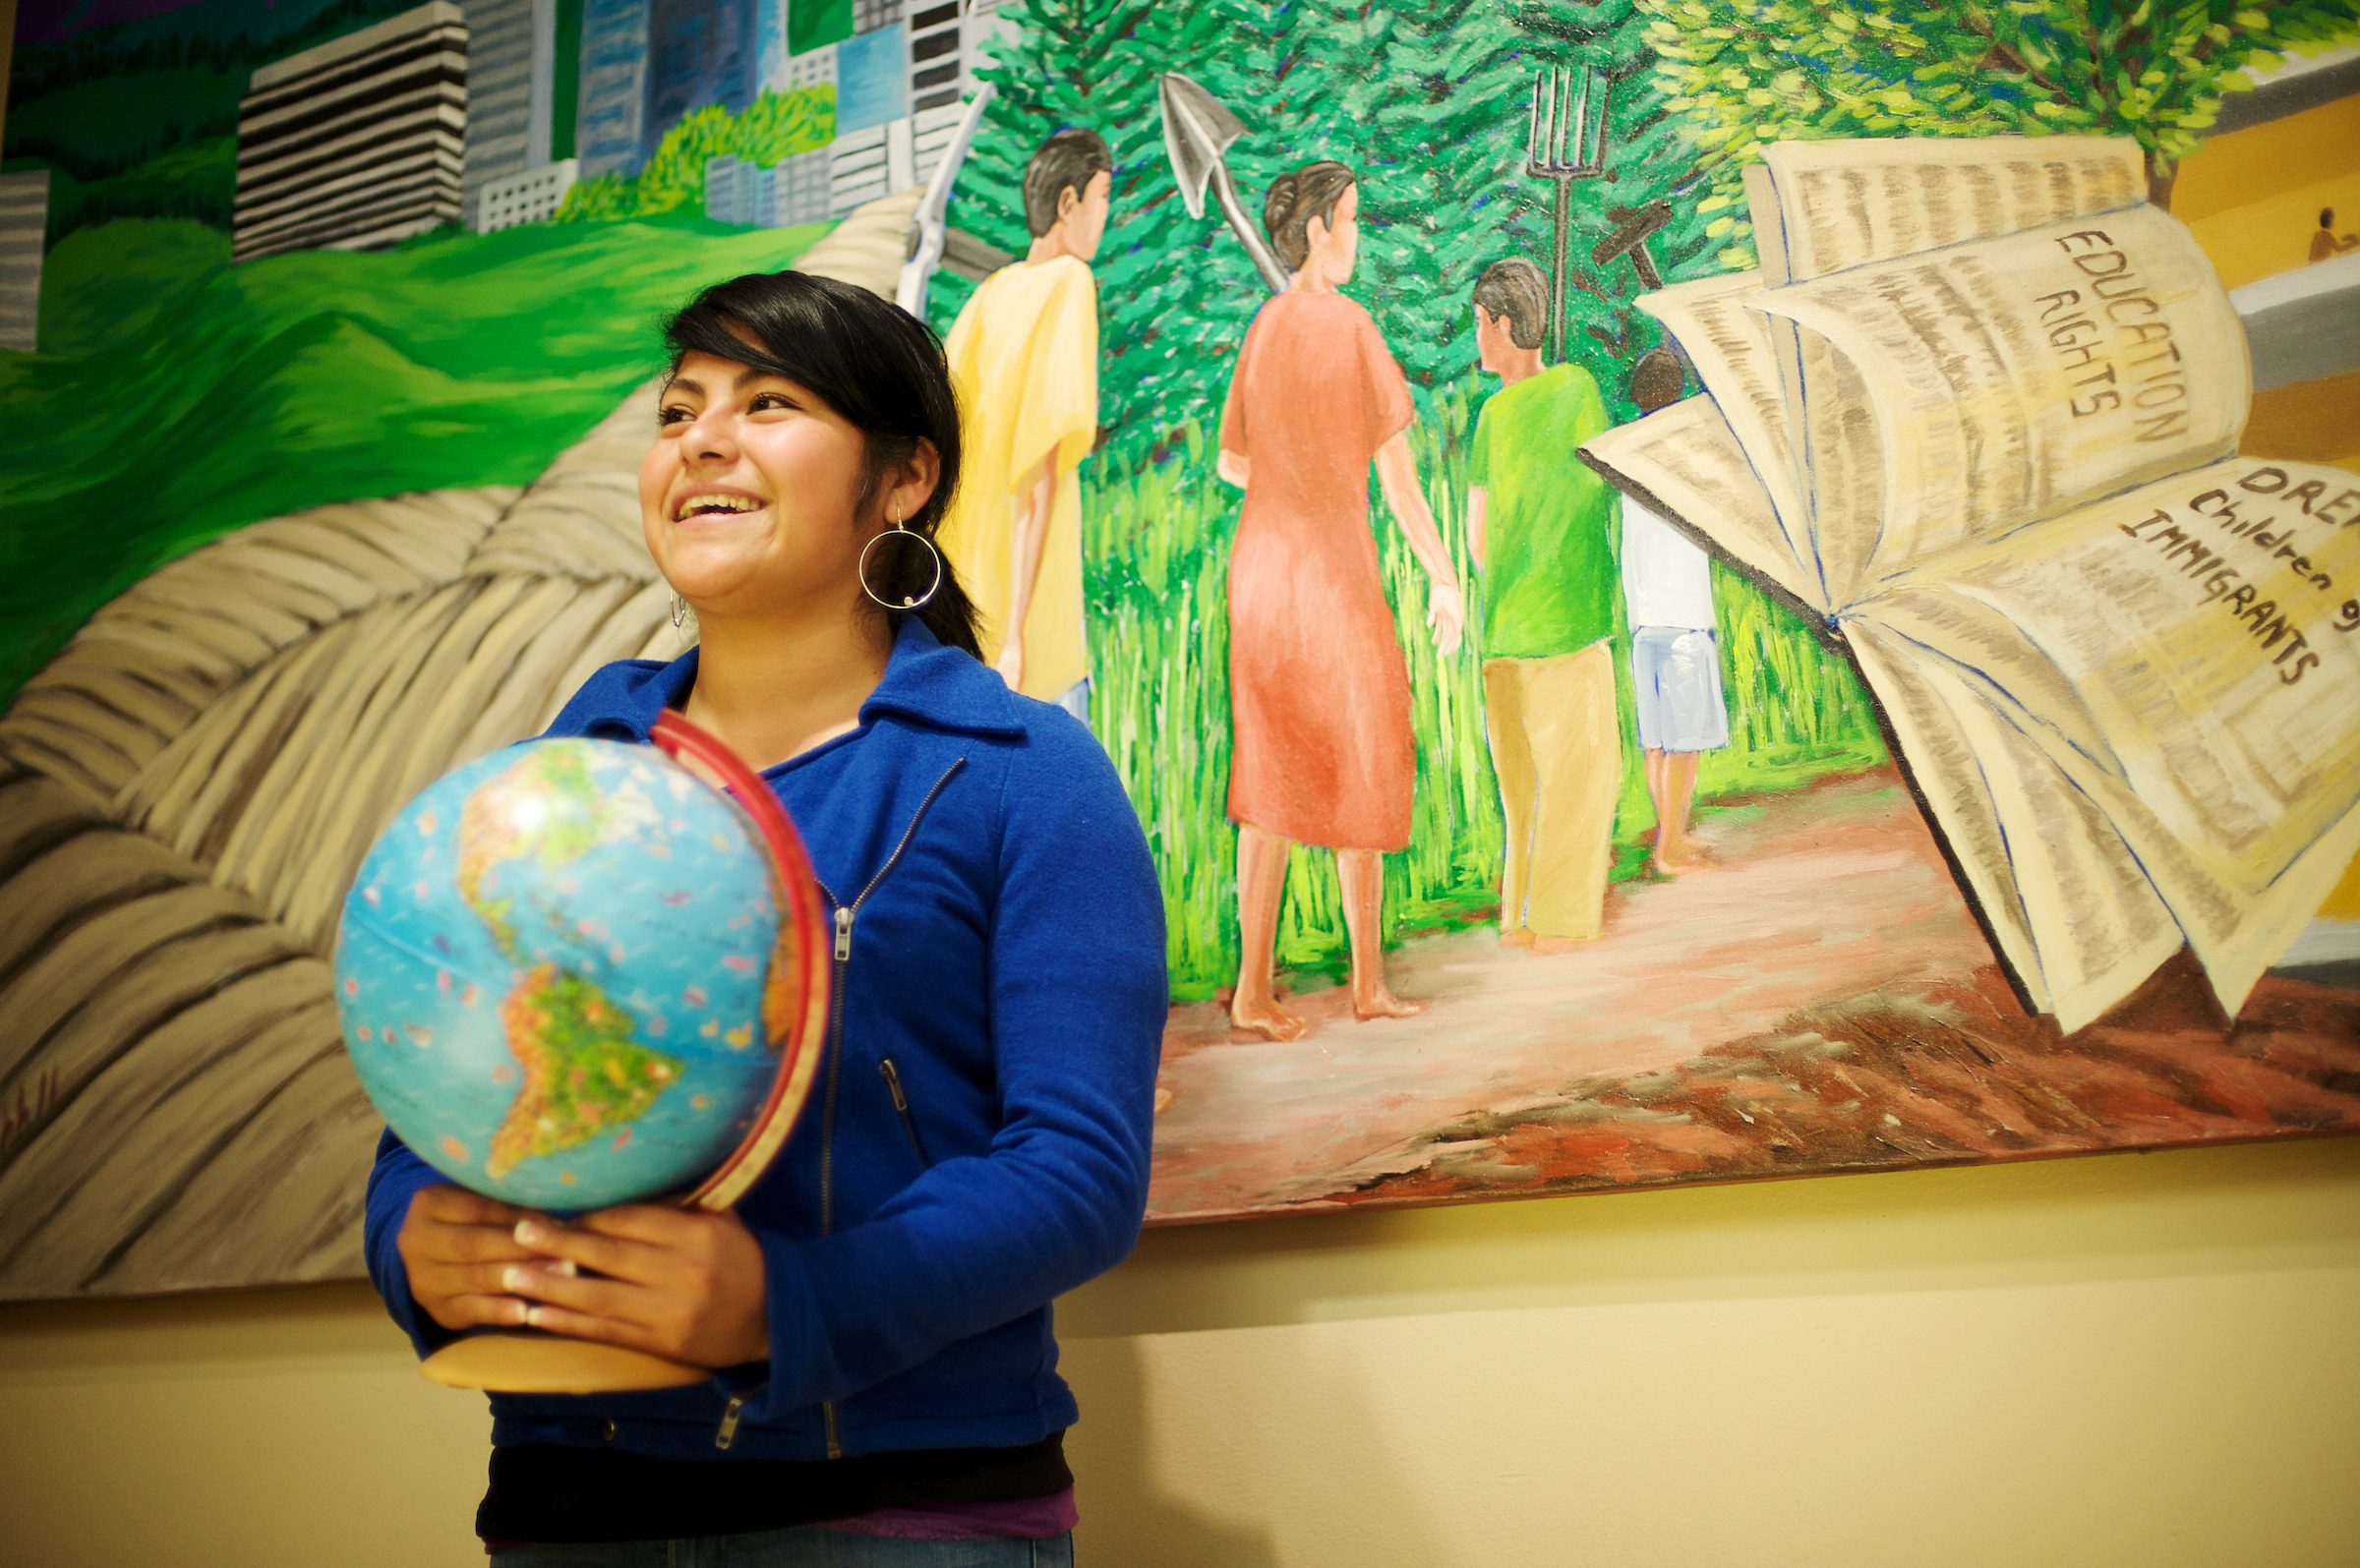 Student holding a globe in front of mural